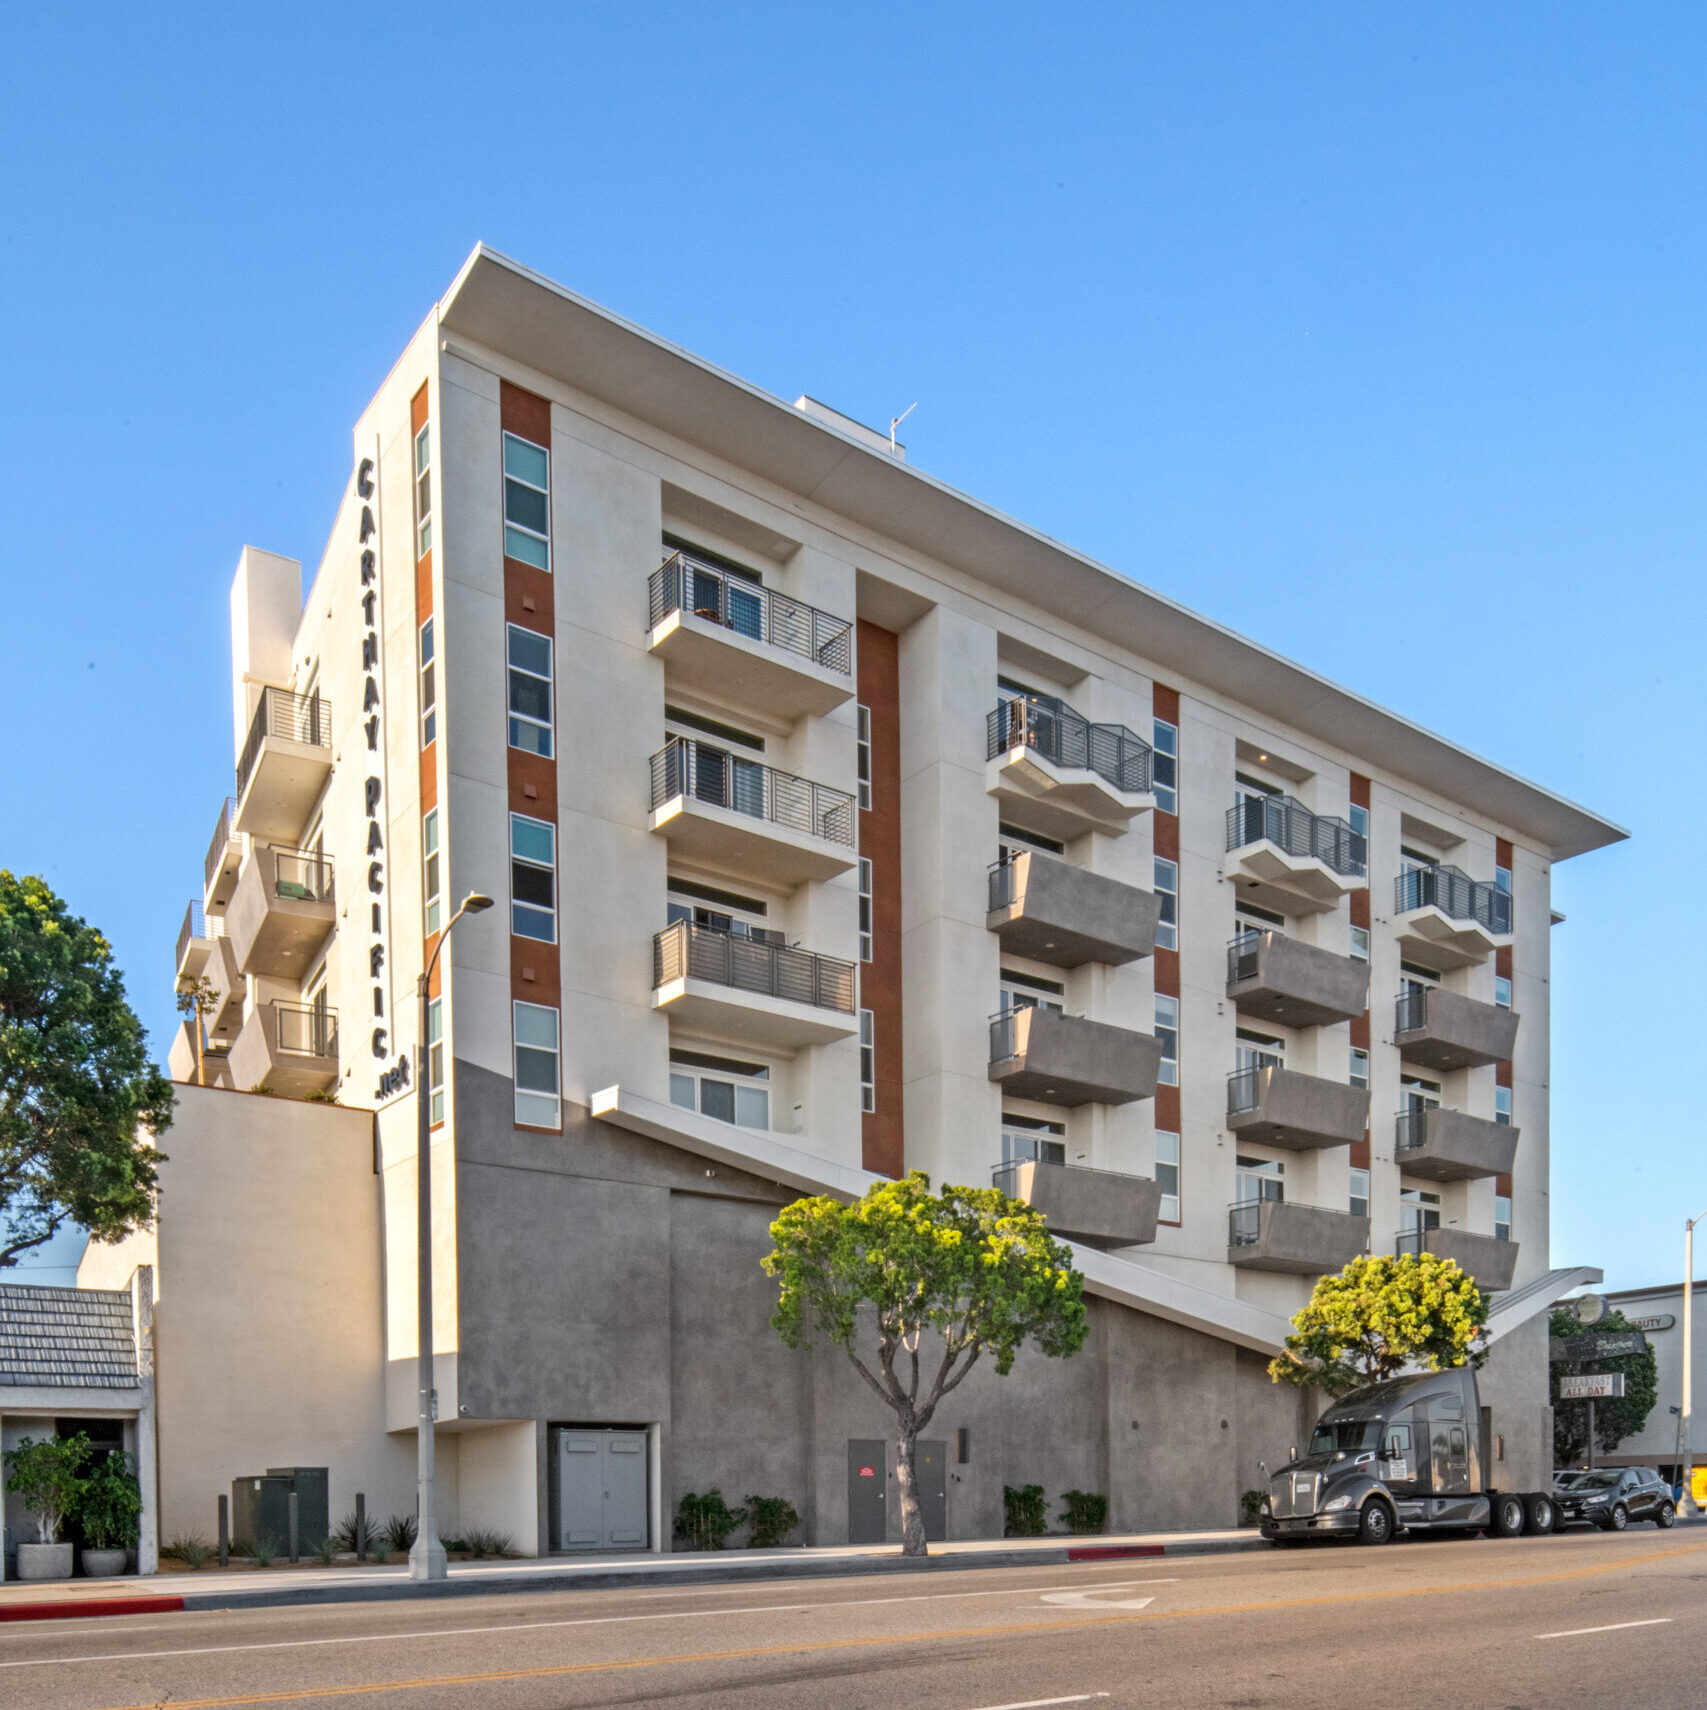 Carthay Apartments in Mid City